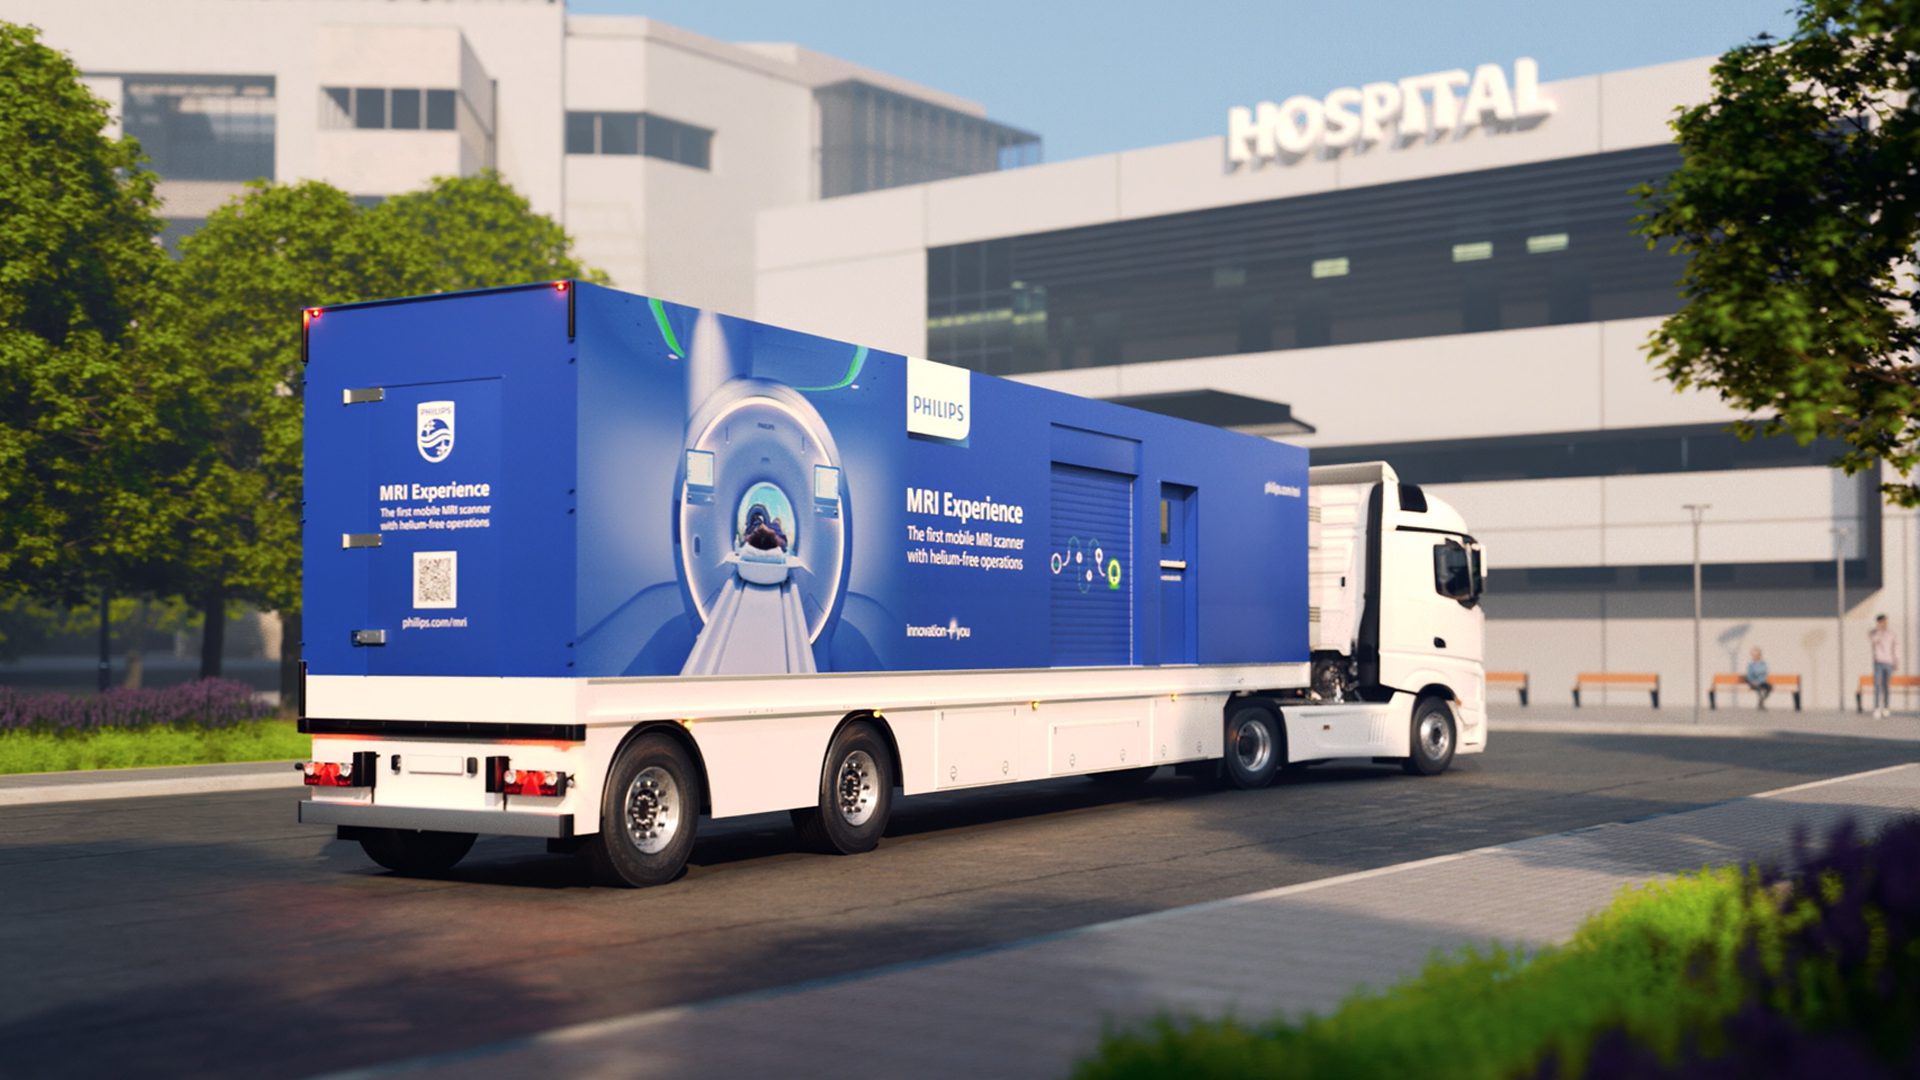 Philips Launches New Cloud-Based PACS & Unveils Mobile MRI System - MedCity News